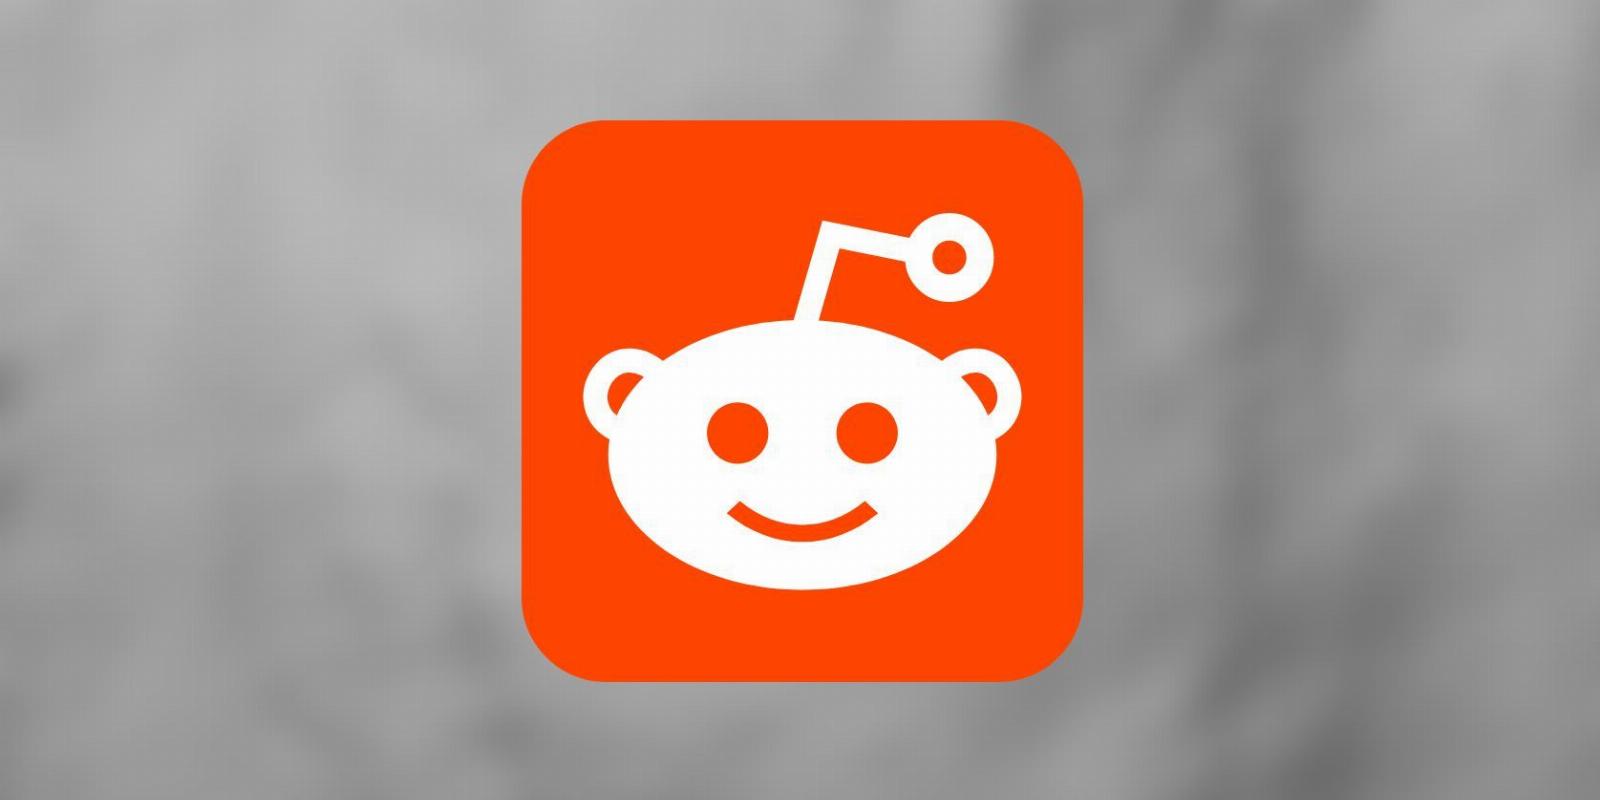 4 Reddit Scams to Watch Out For